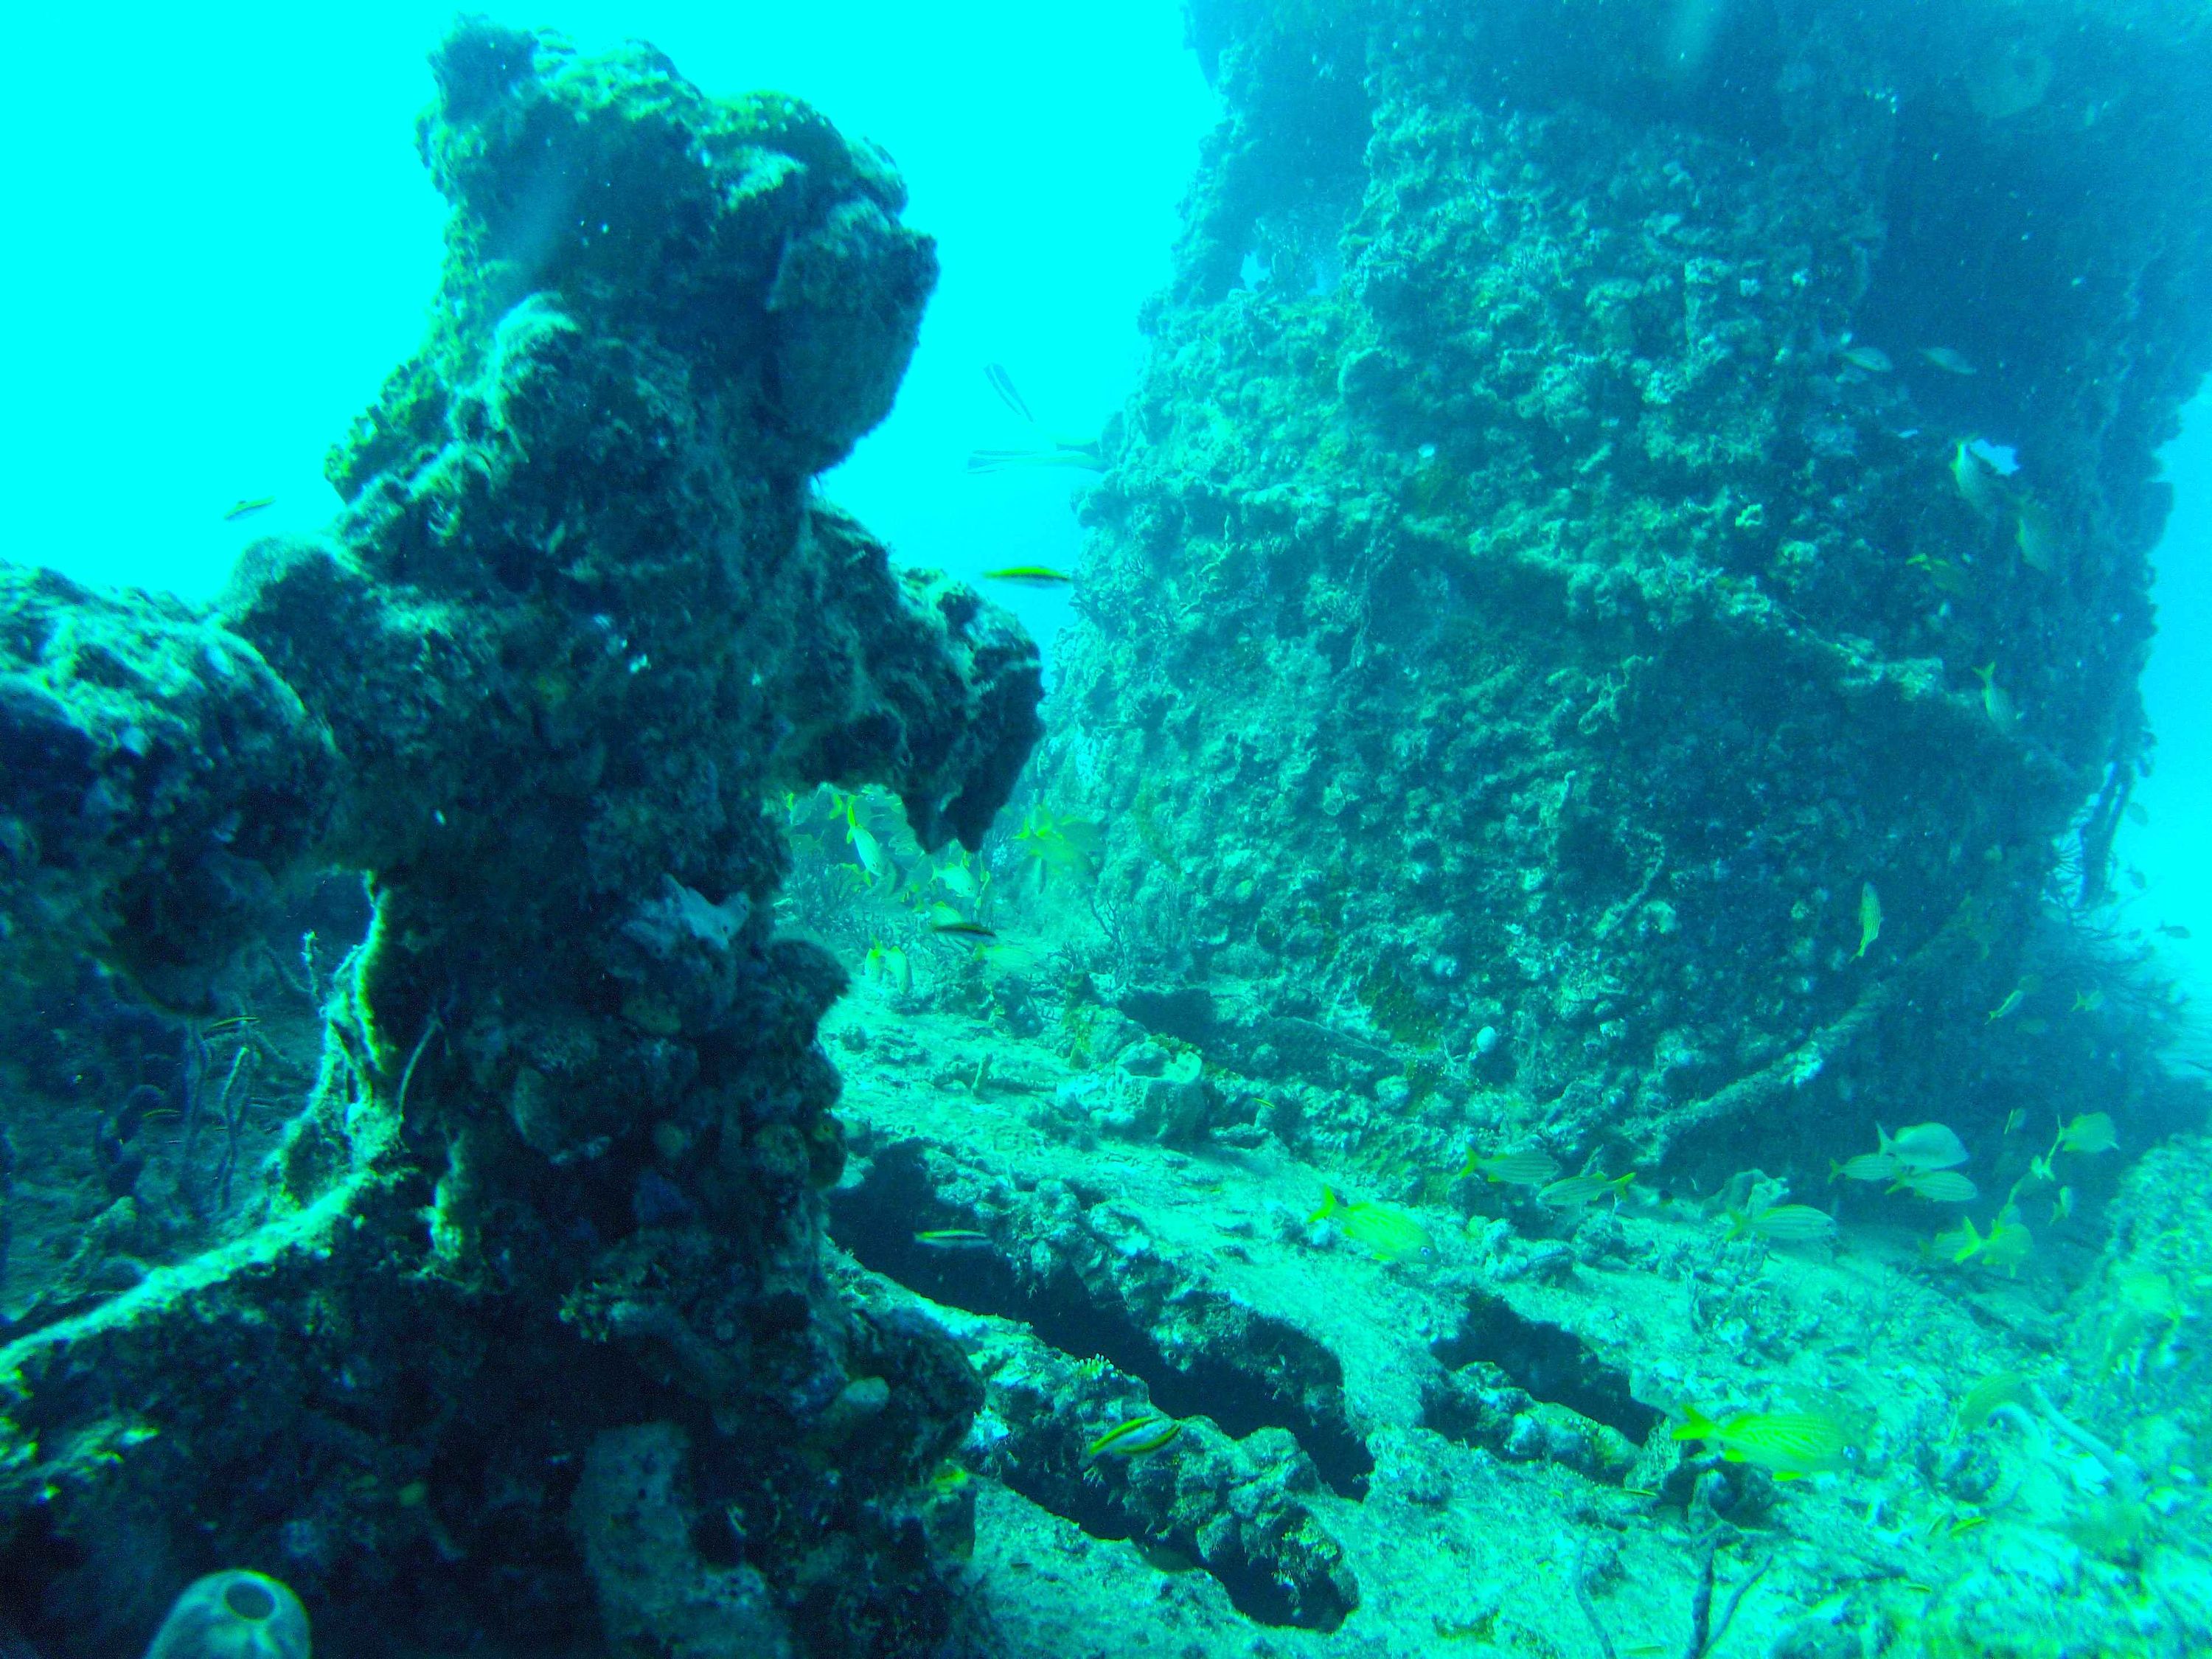 Pictures from first few dives